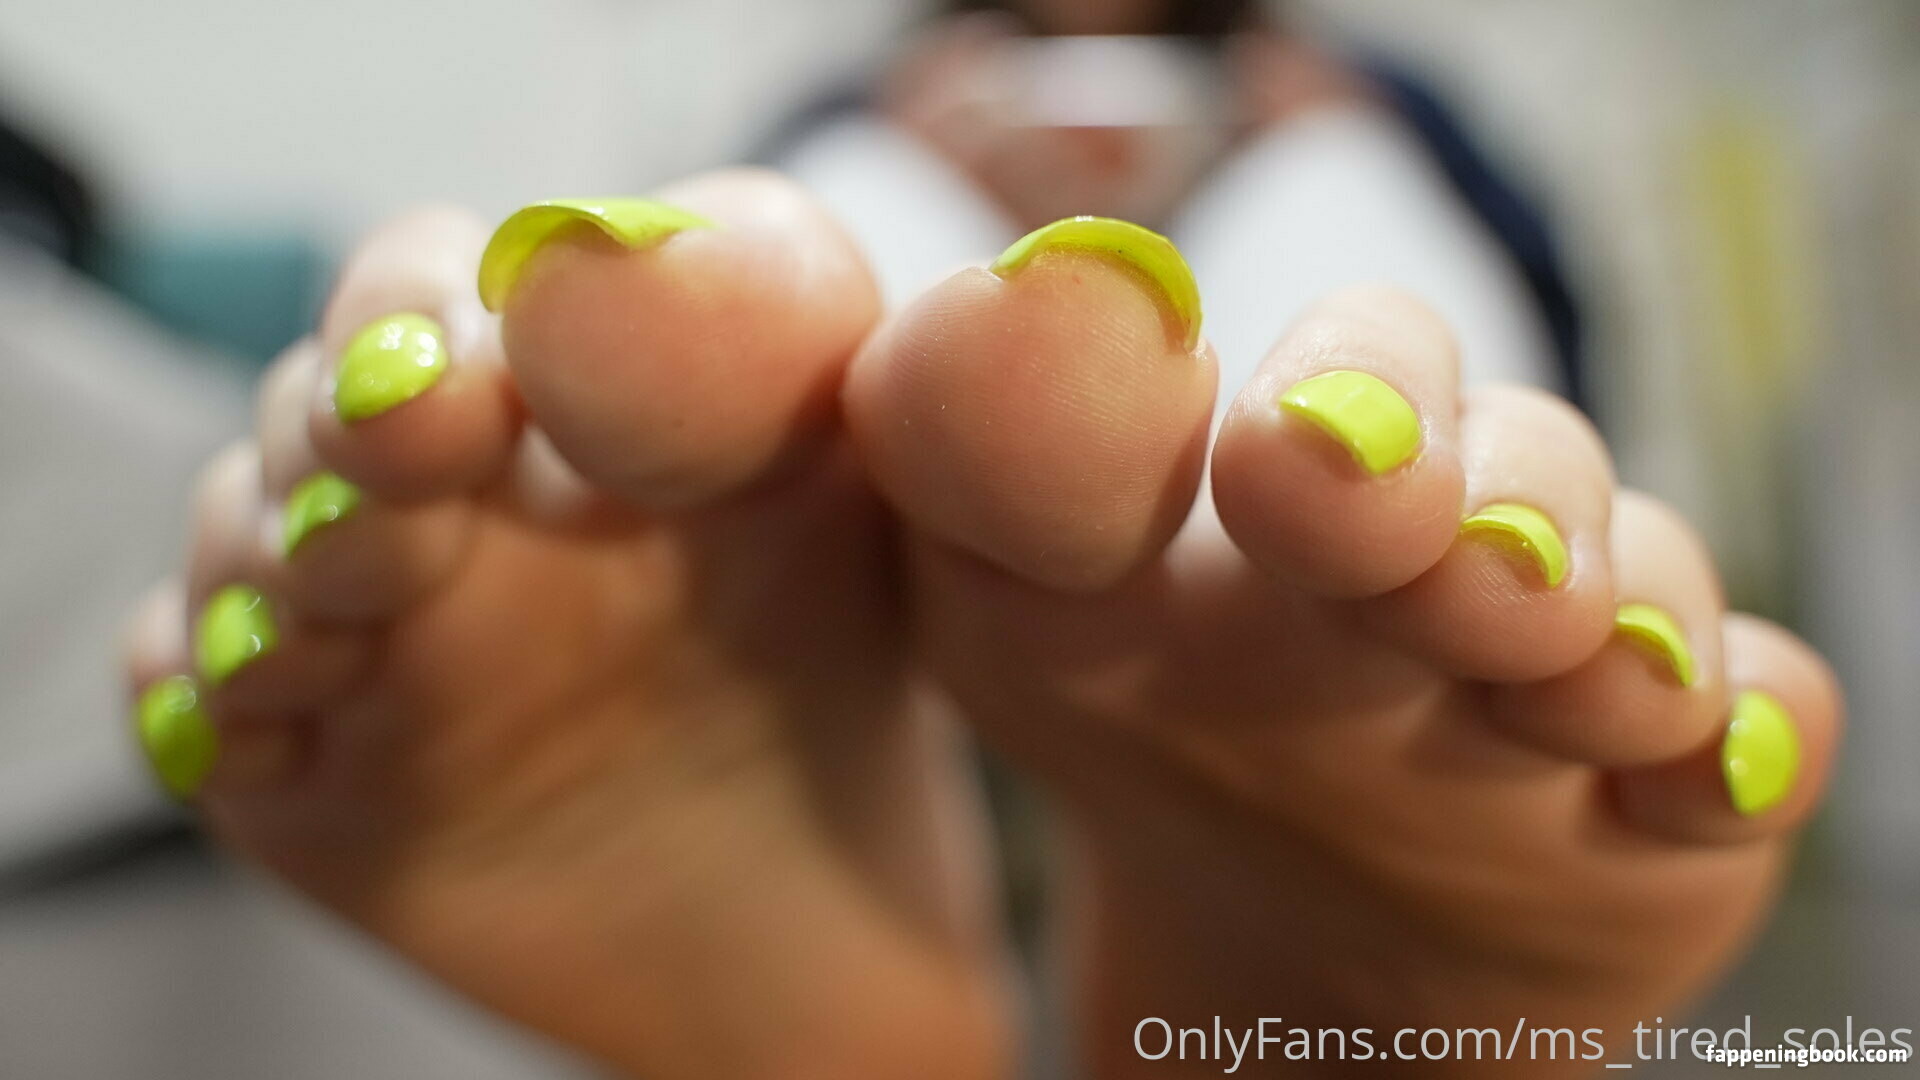 ms_tired_soles Nude OnlyFans Leaks